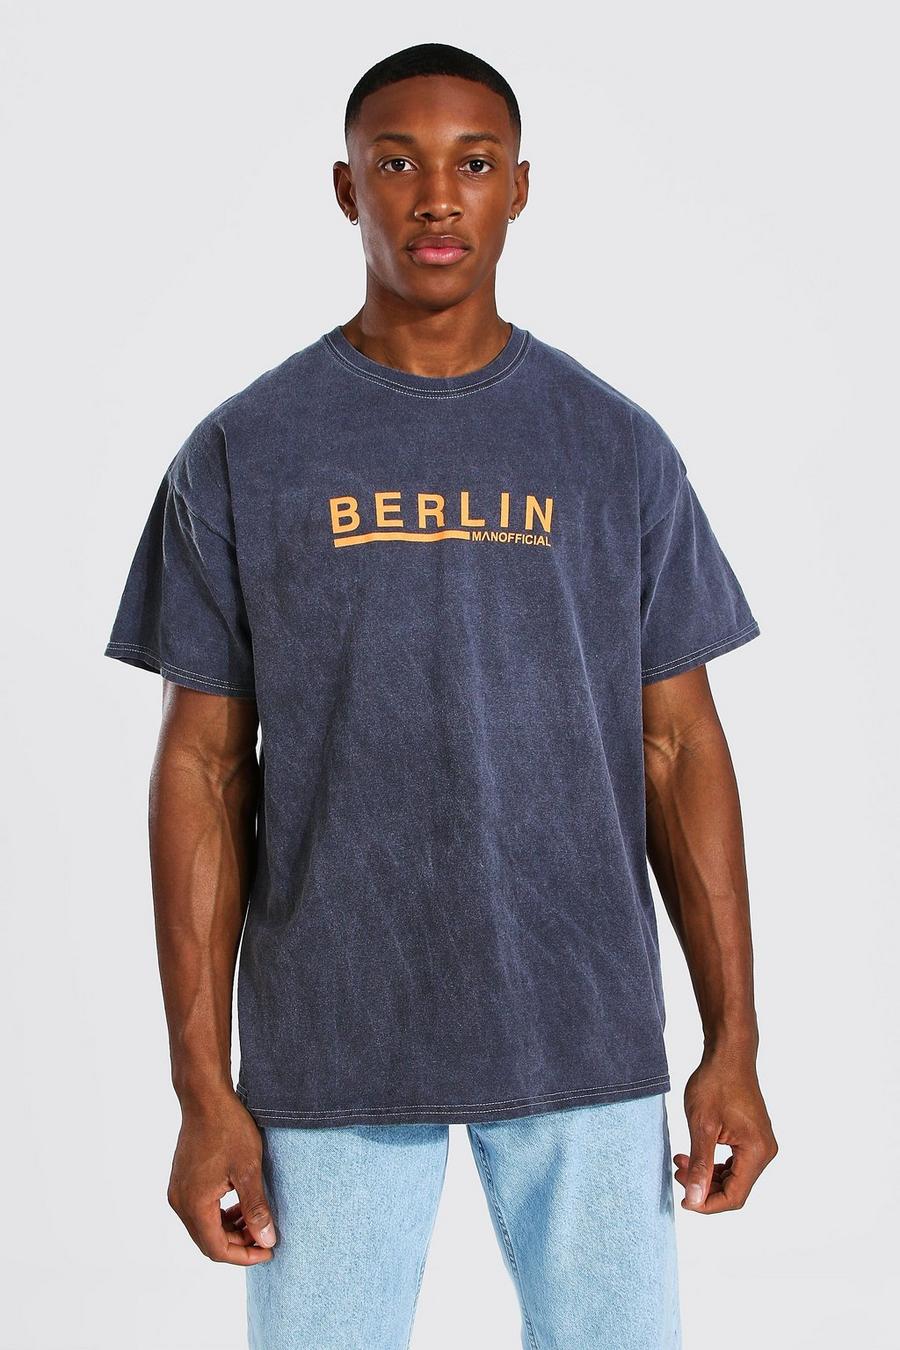 Charcoal Oversized Overdyed Berlin Print T-shirt image number 1